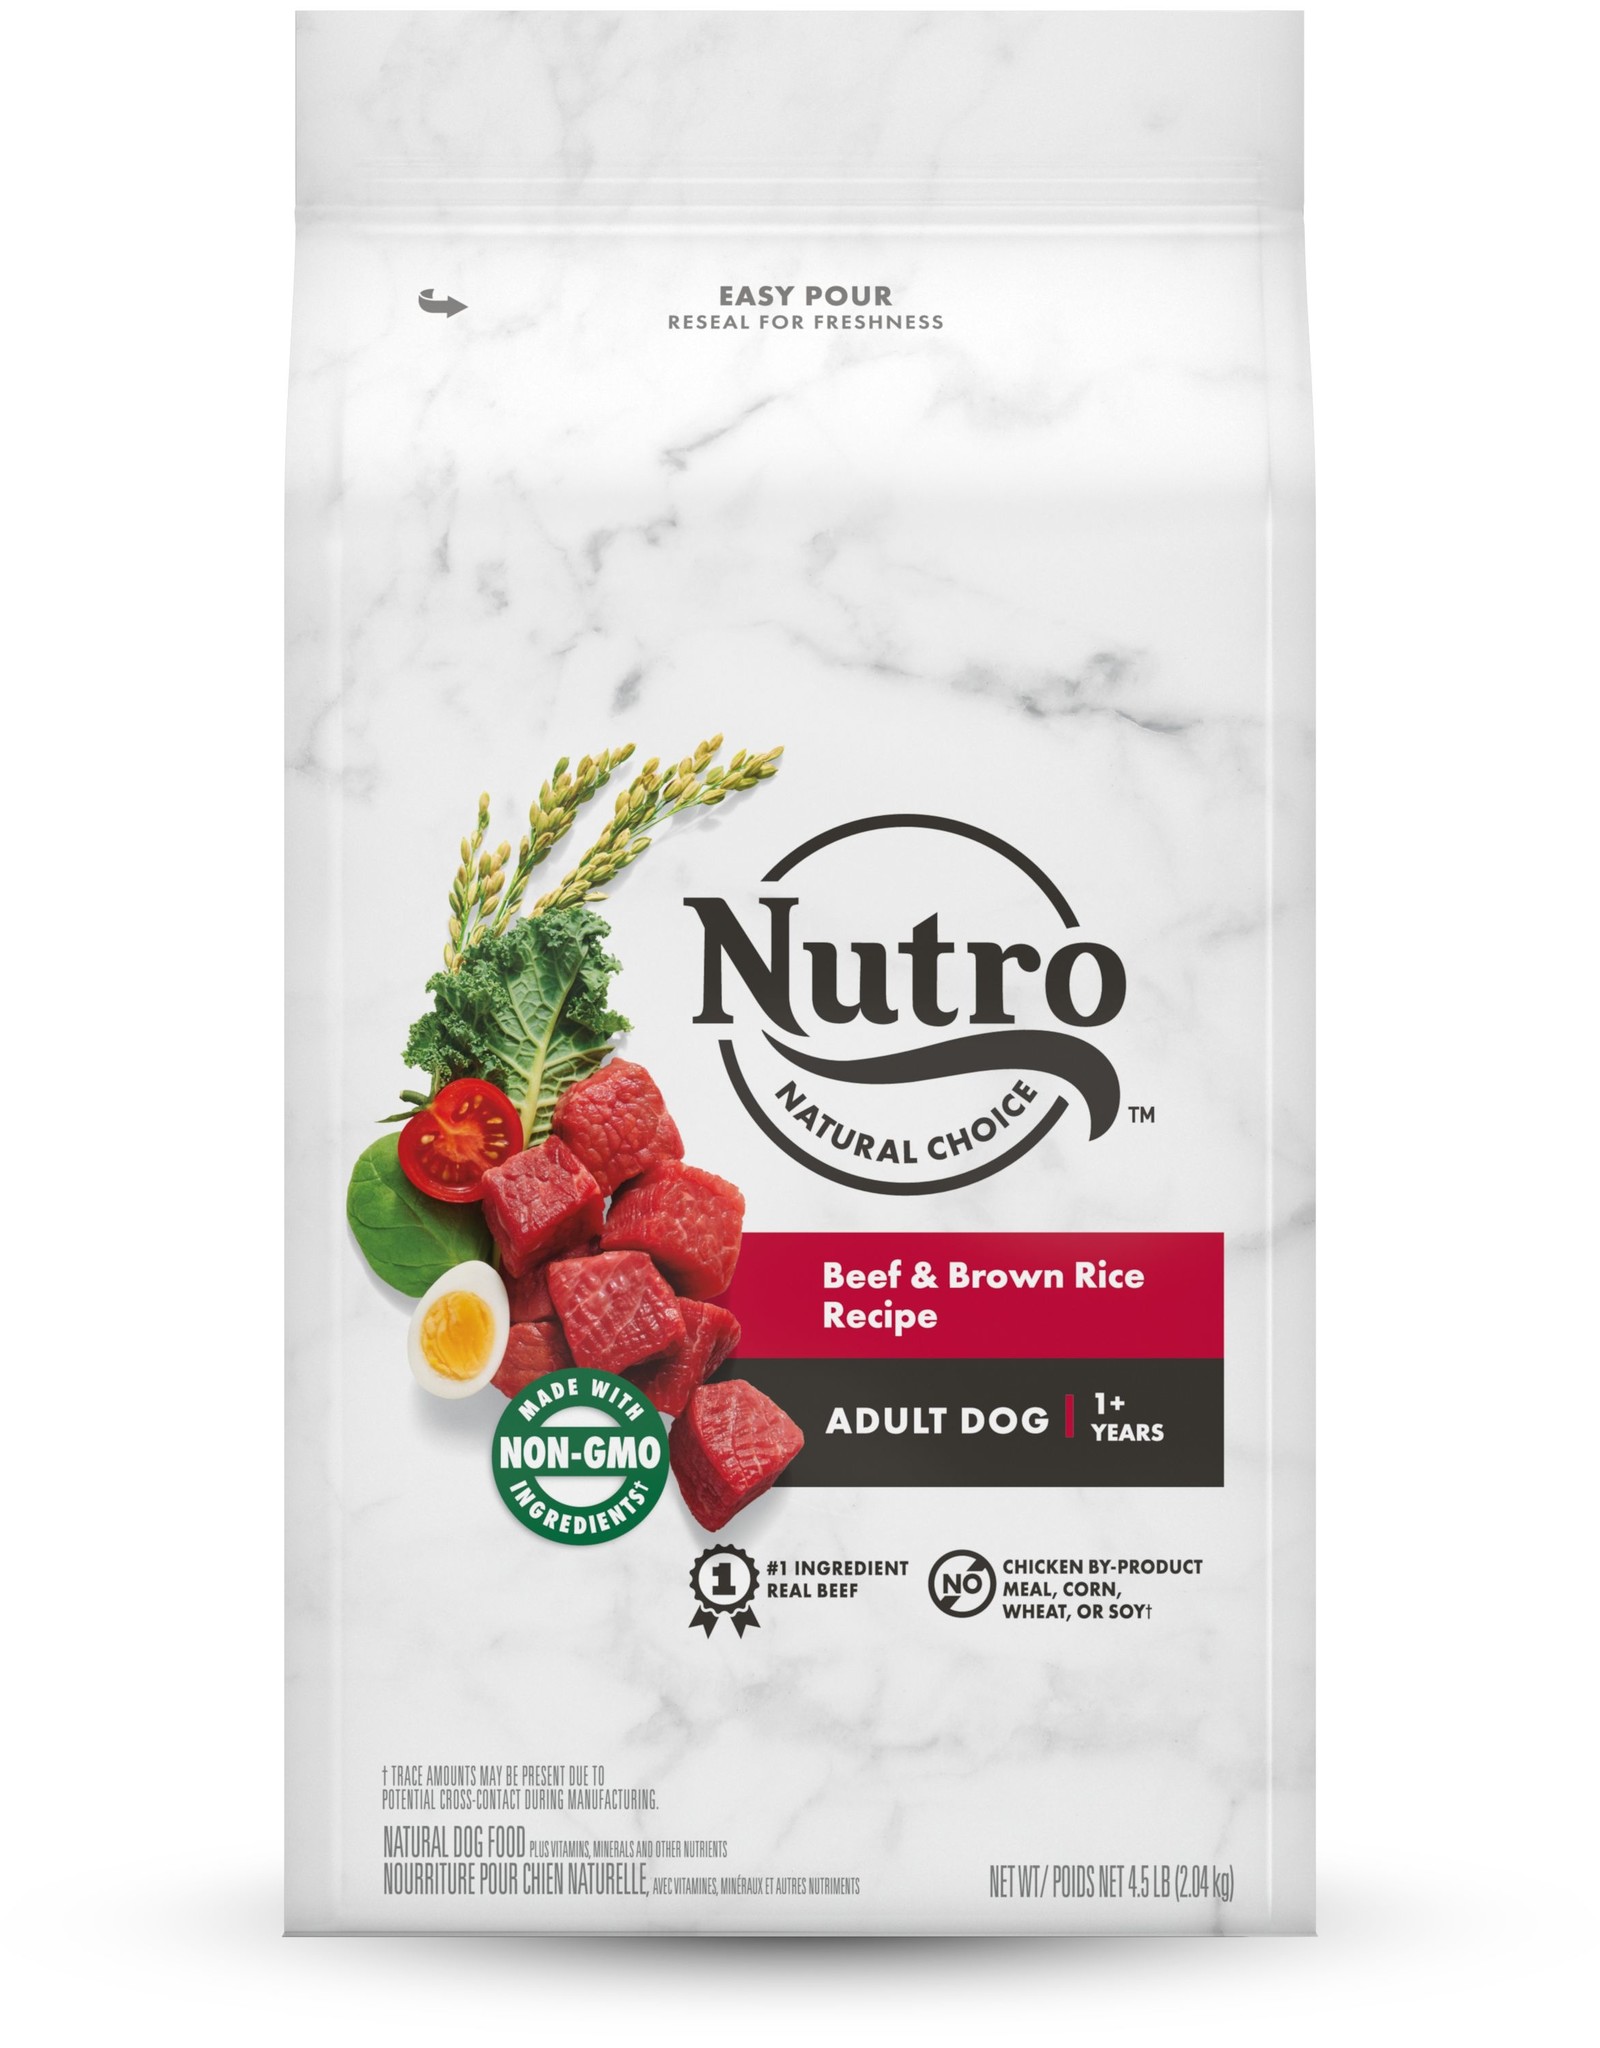 NUTRO PRODUCTS  INC. NUTRO NATURAL CHOICE BEEF & RICE 4LBS